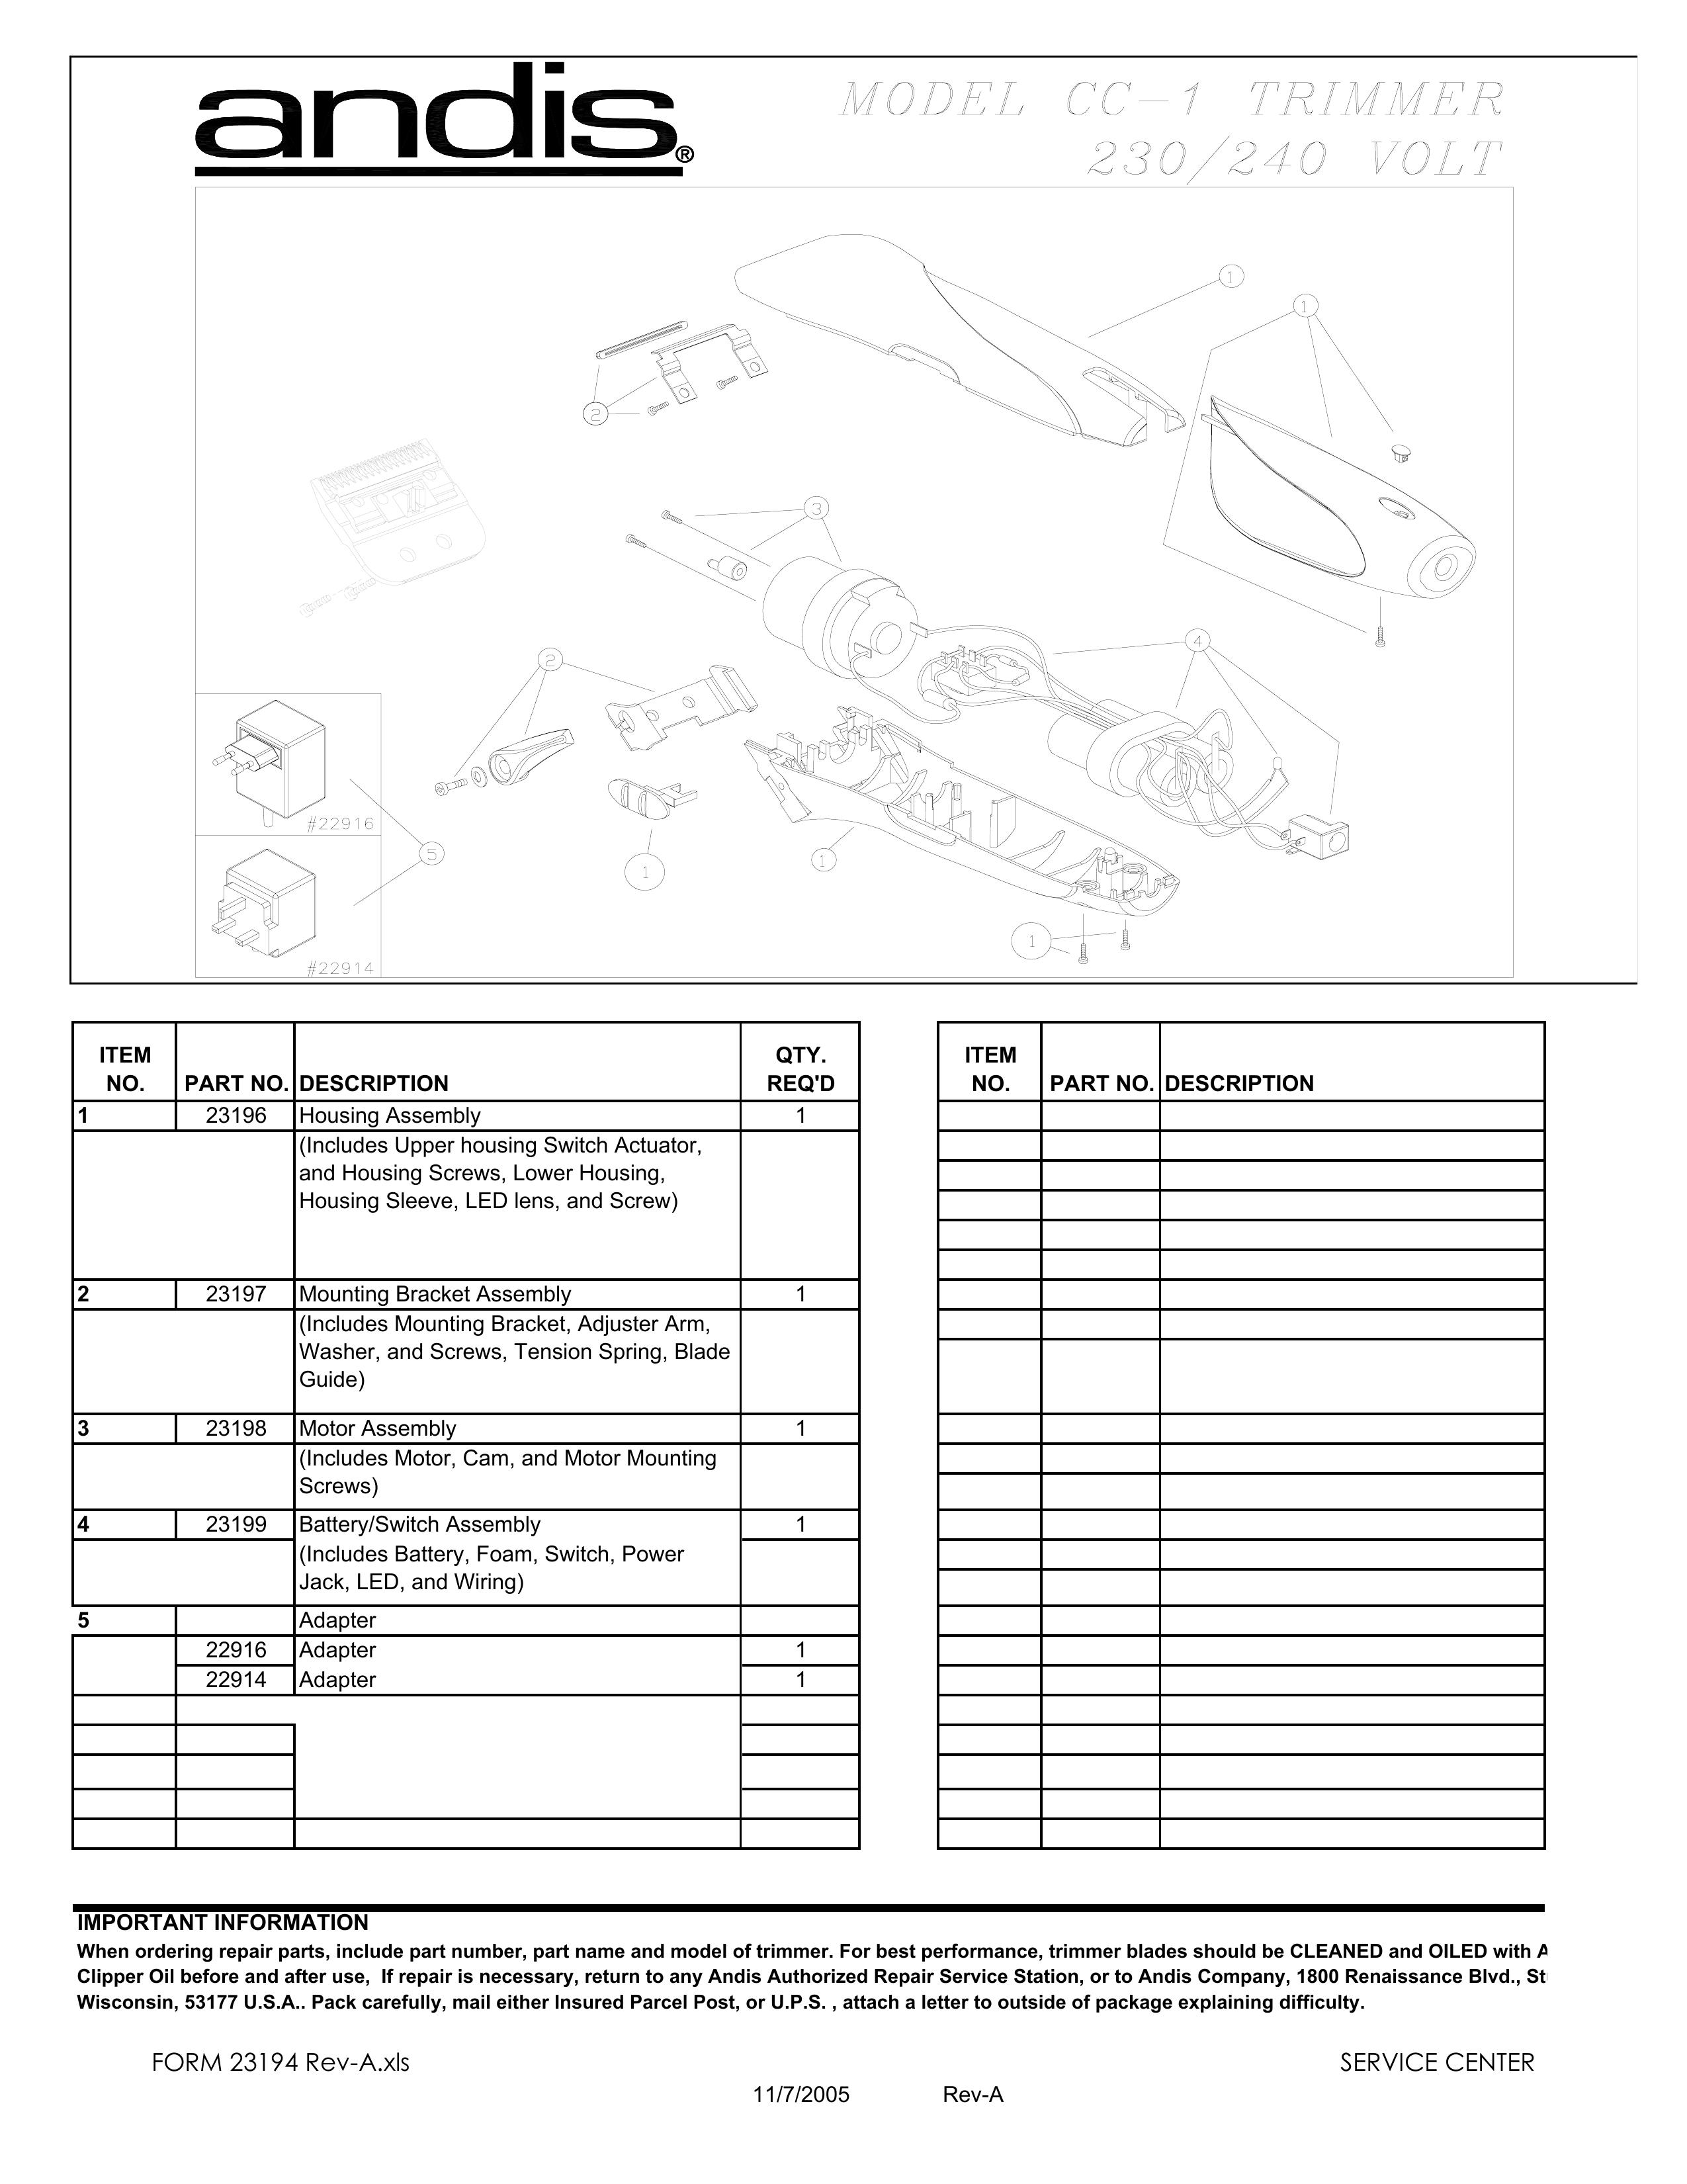 Andis Company CC-1 Trimmer User Manual